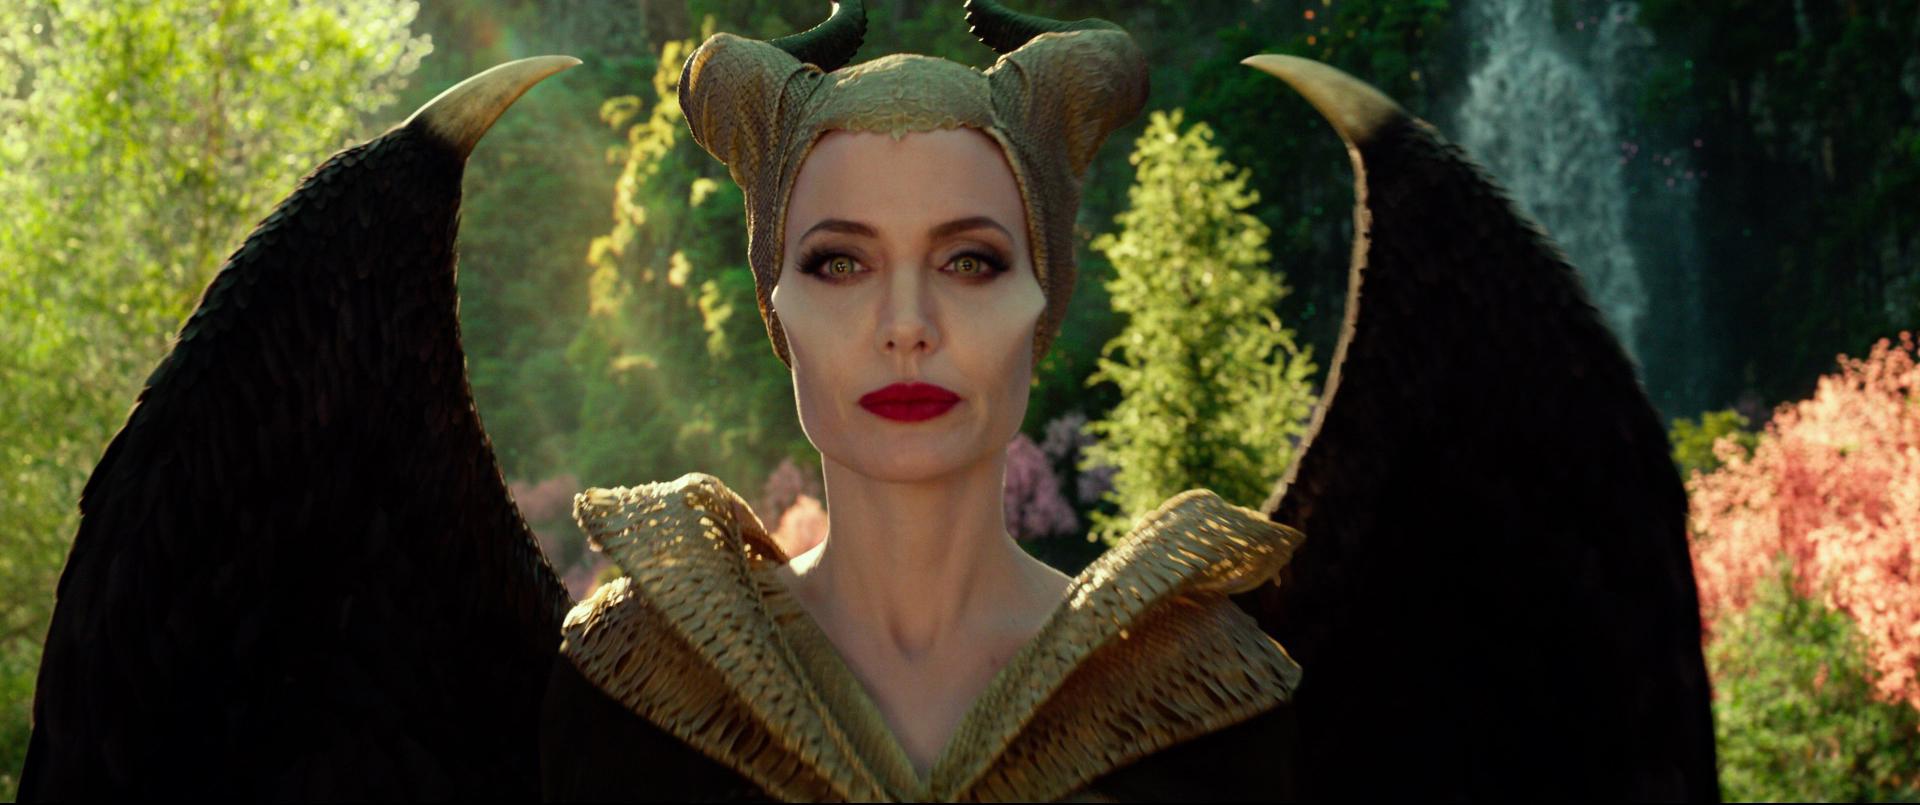 New Poster For Maleficent: Mistress of Evil Starring